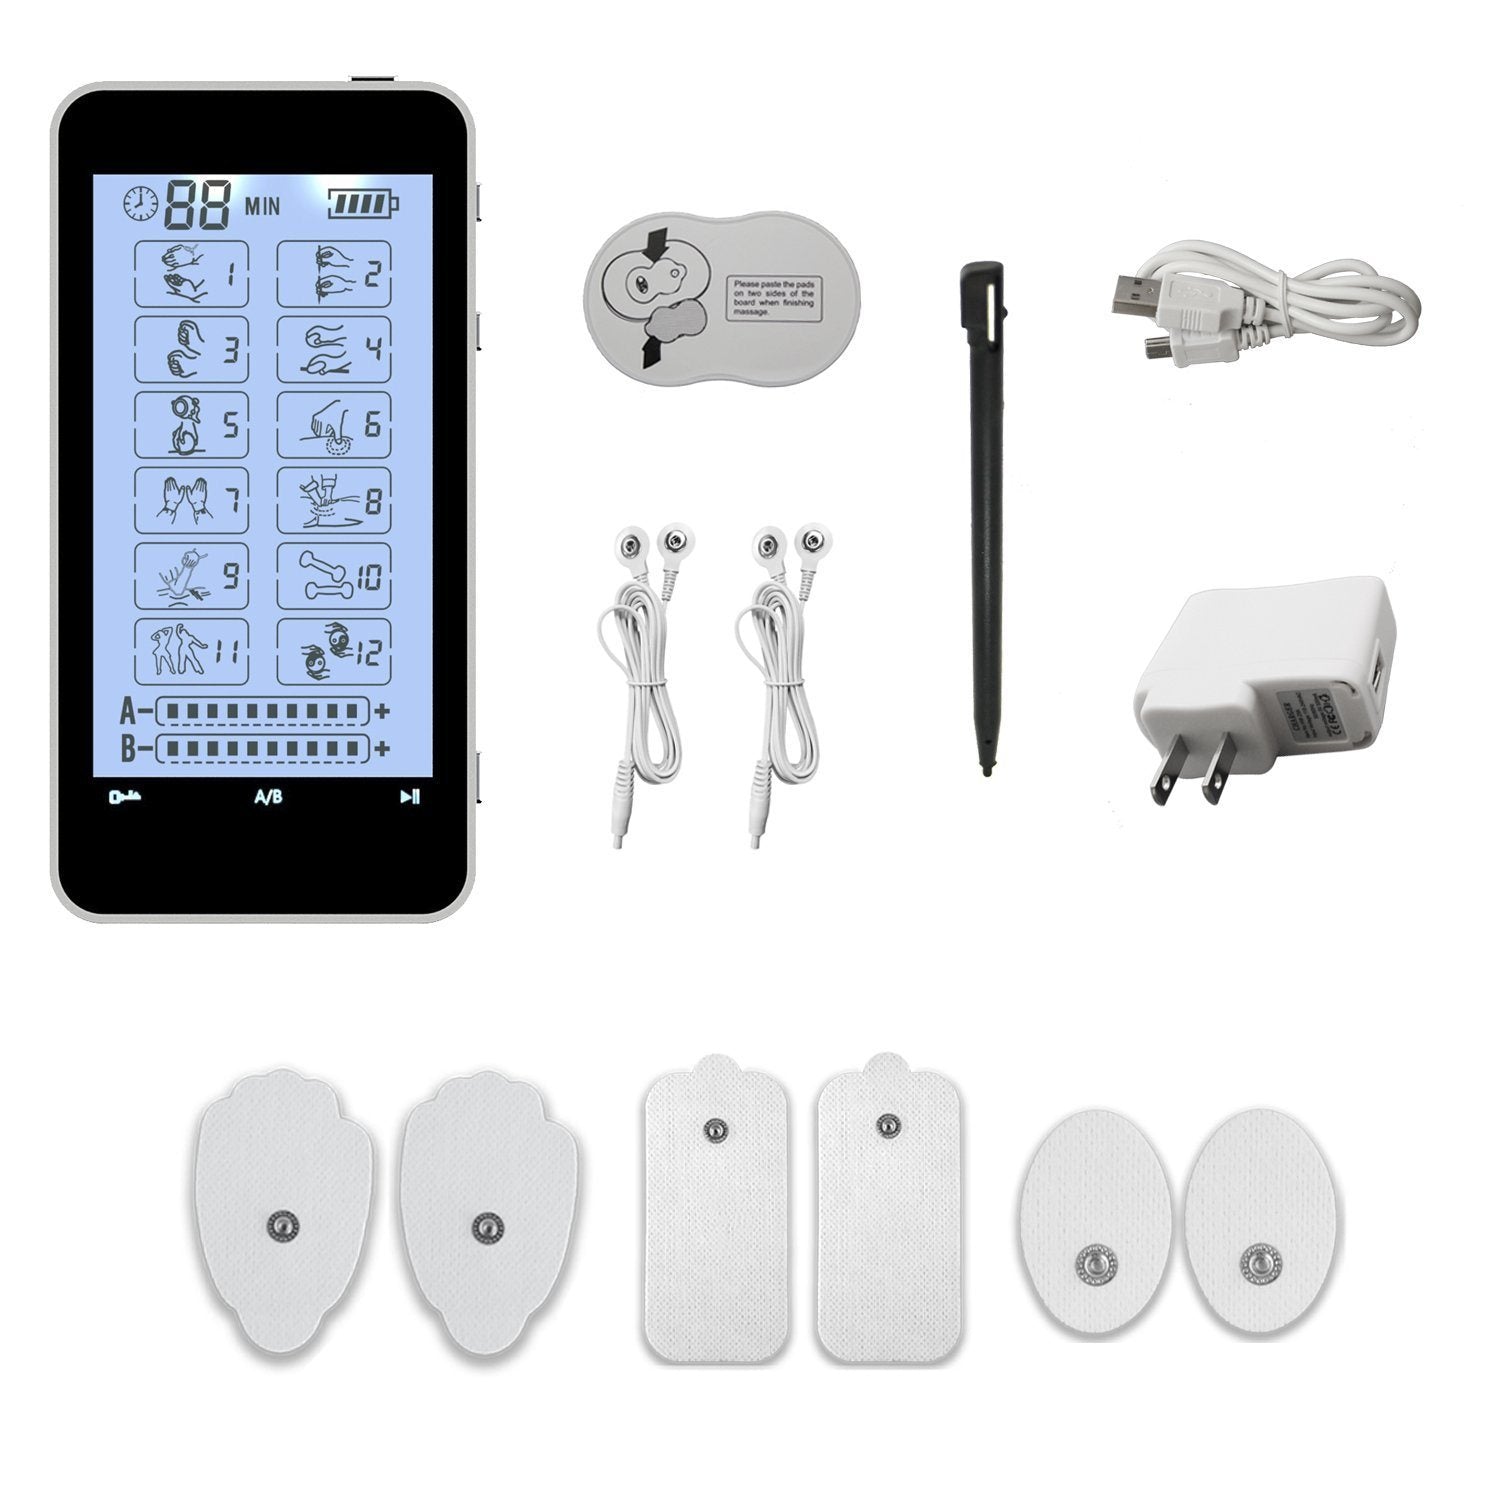 PRO15AB Pain Relief TENS Unit & Muscle Stimulator - 2 Year Warranty